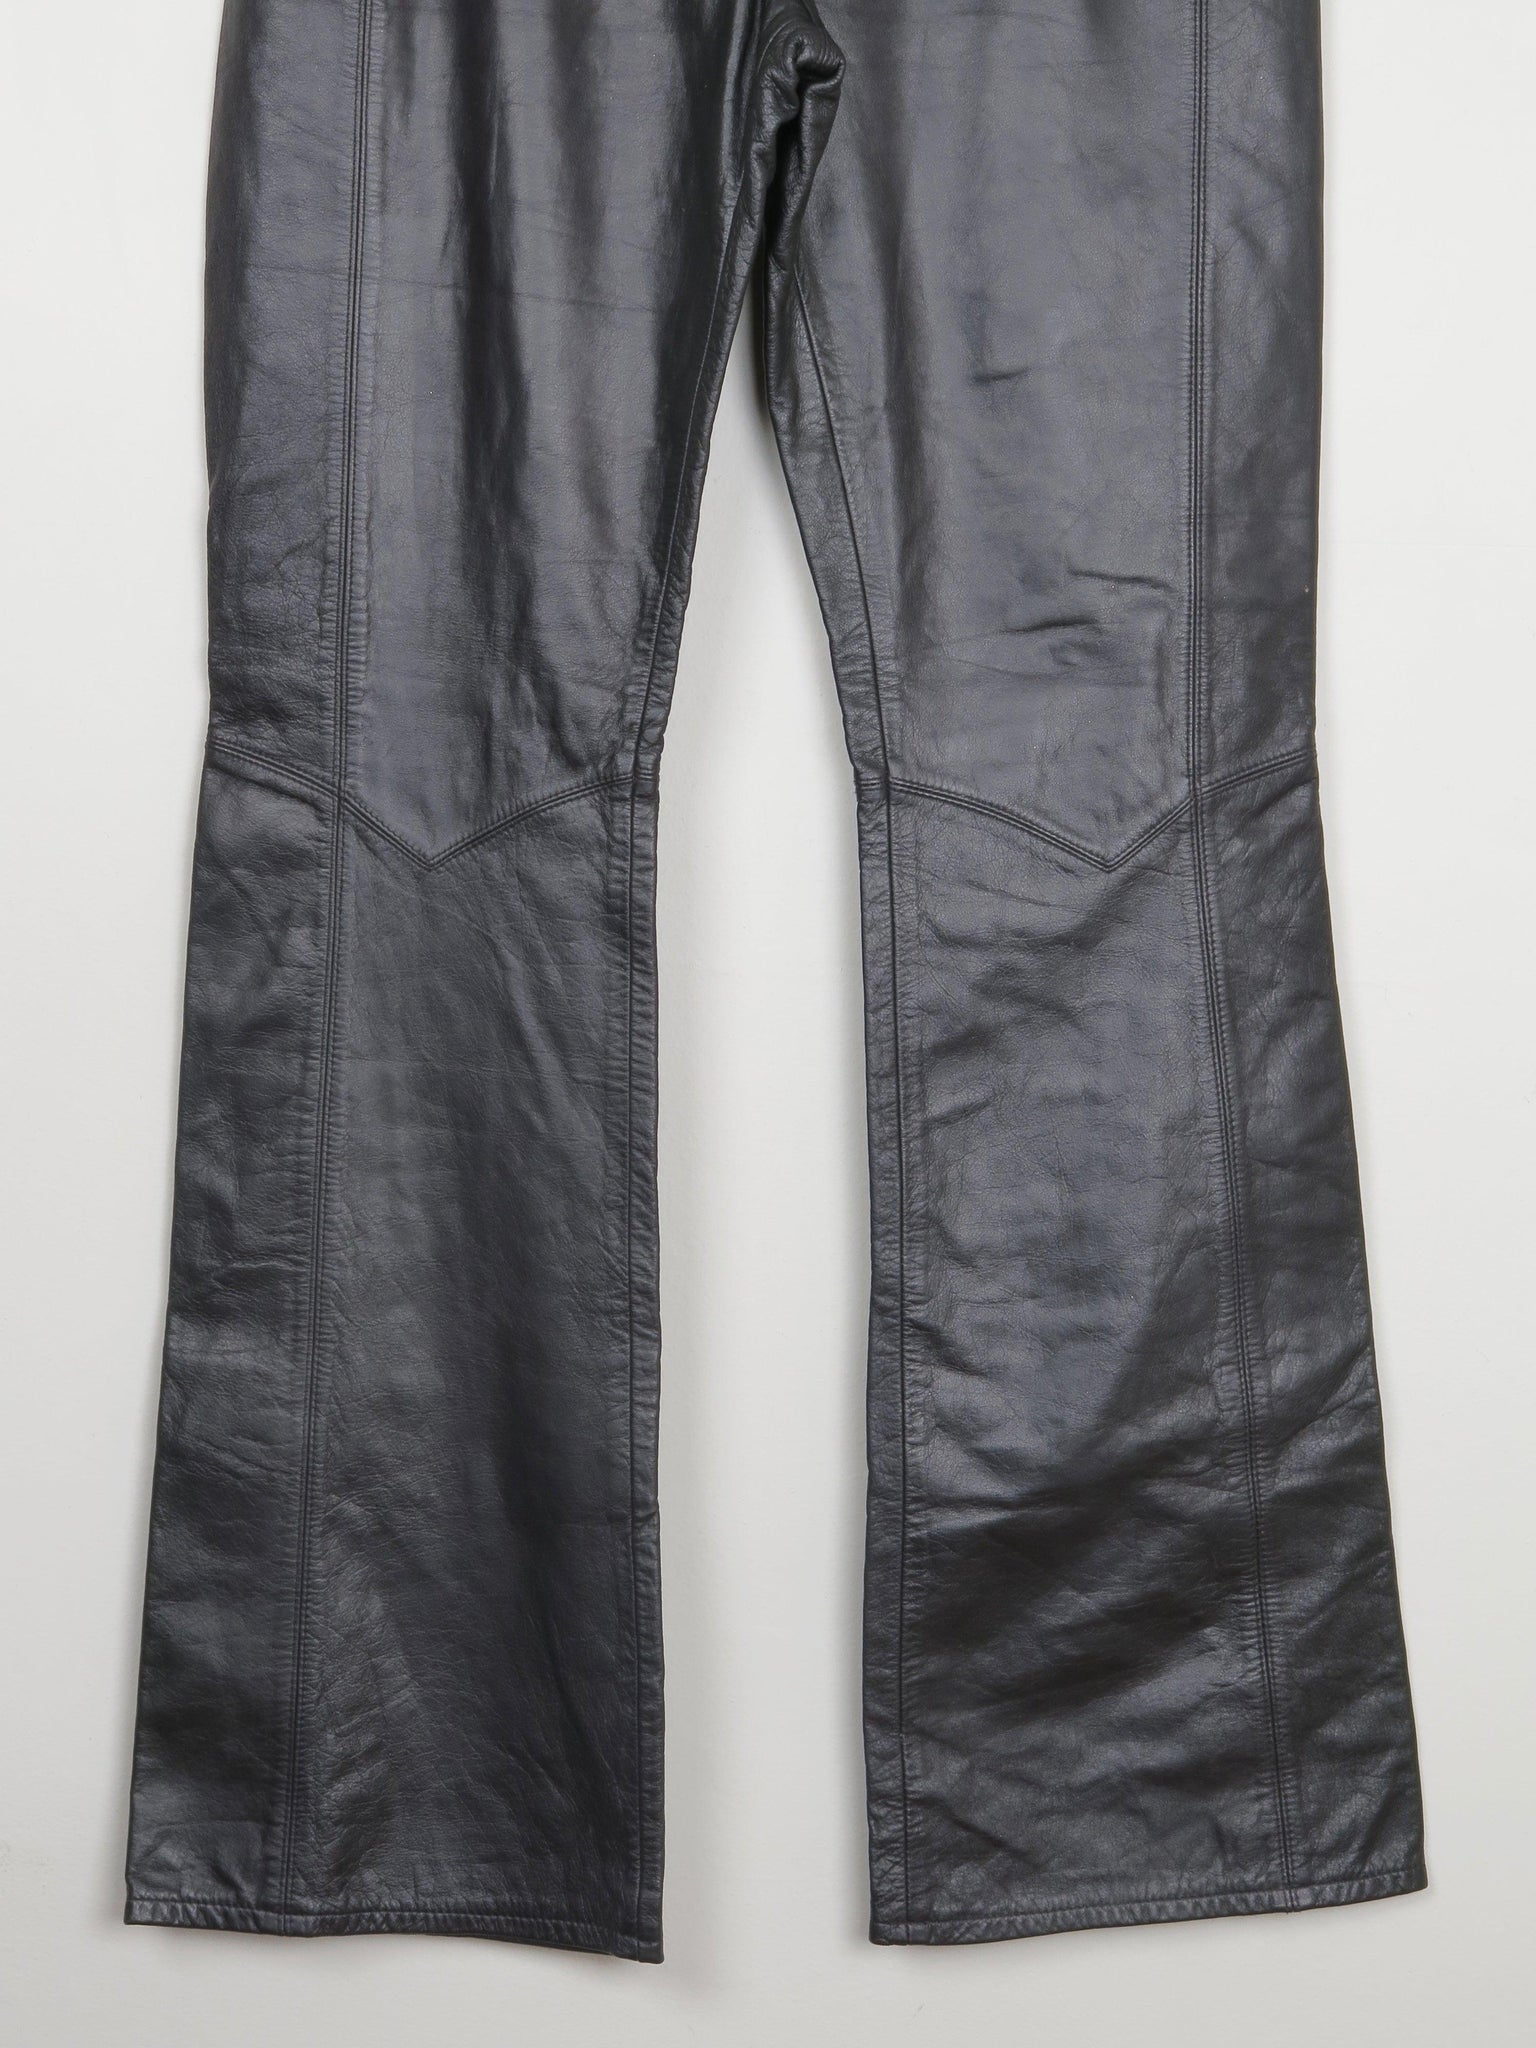 Women's Black Leather Levi’s Trousers 28"/32L - The Harlequin